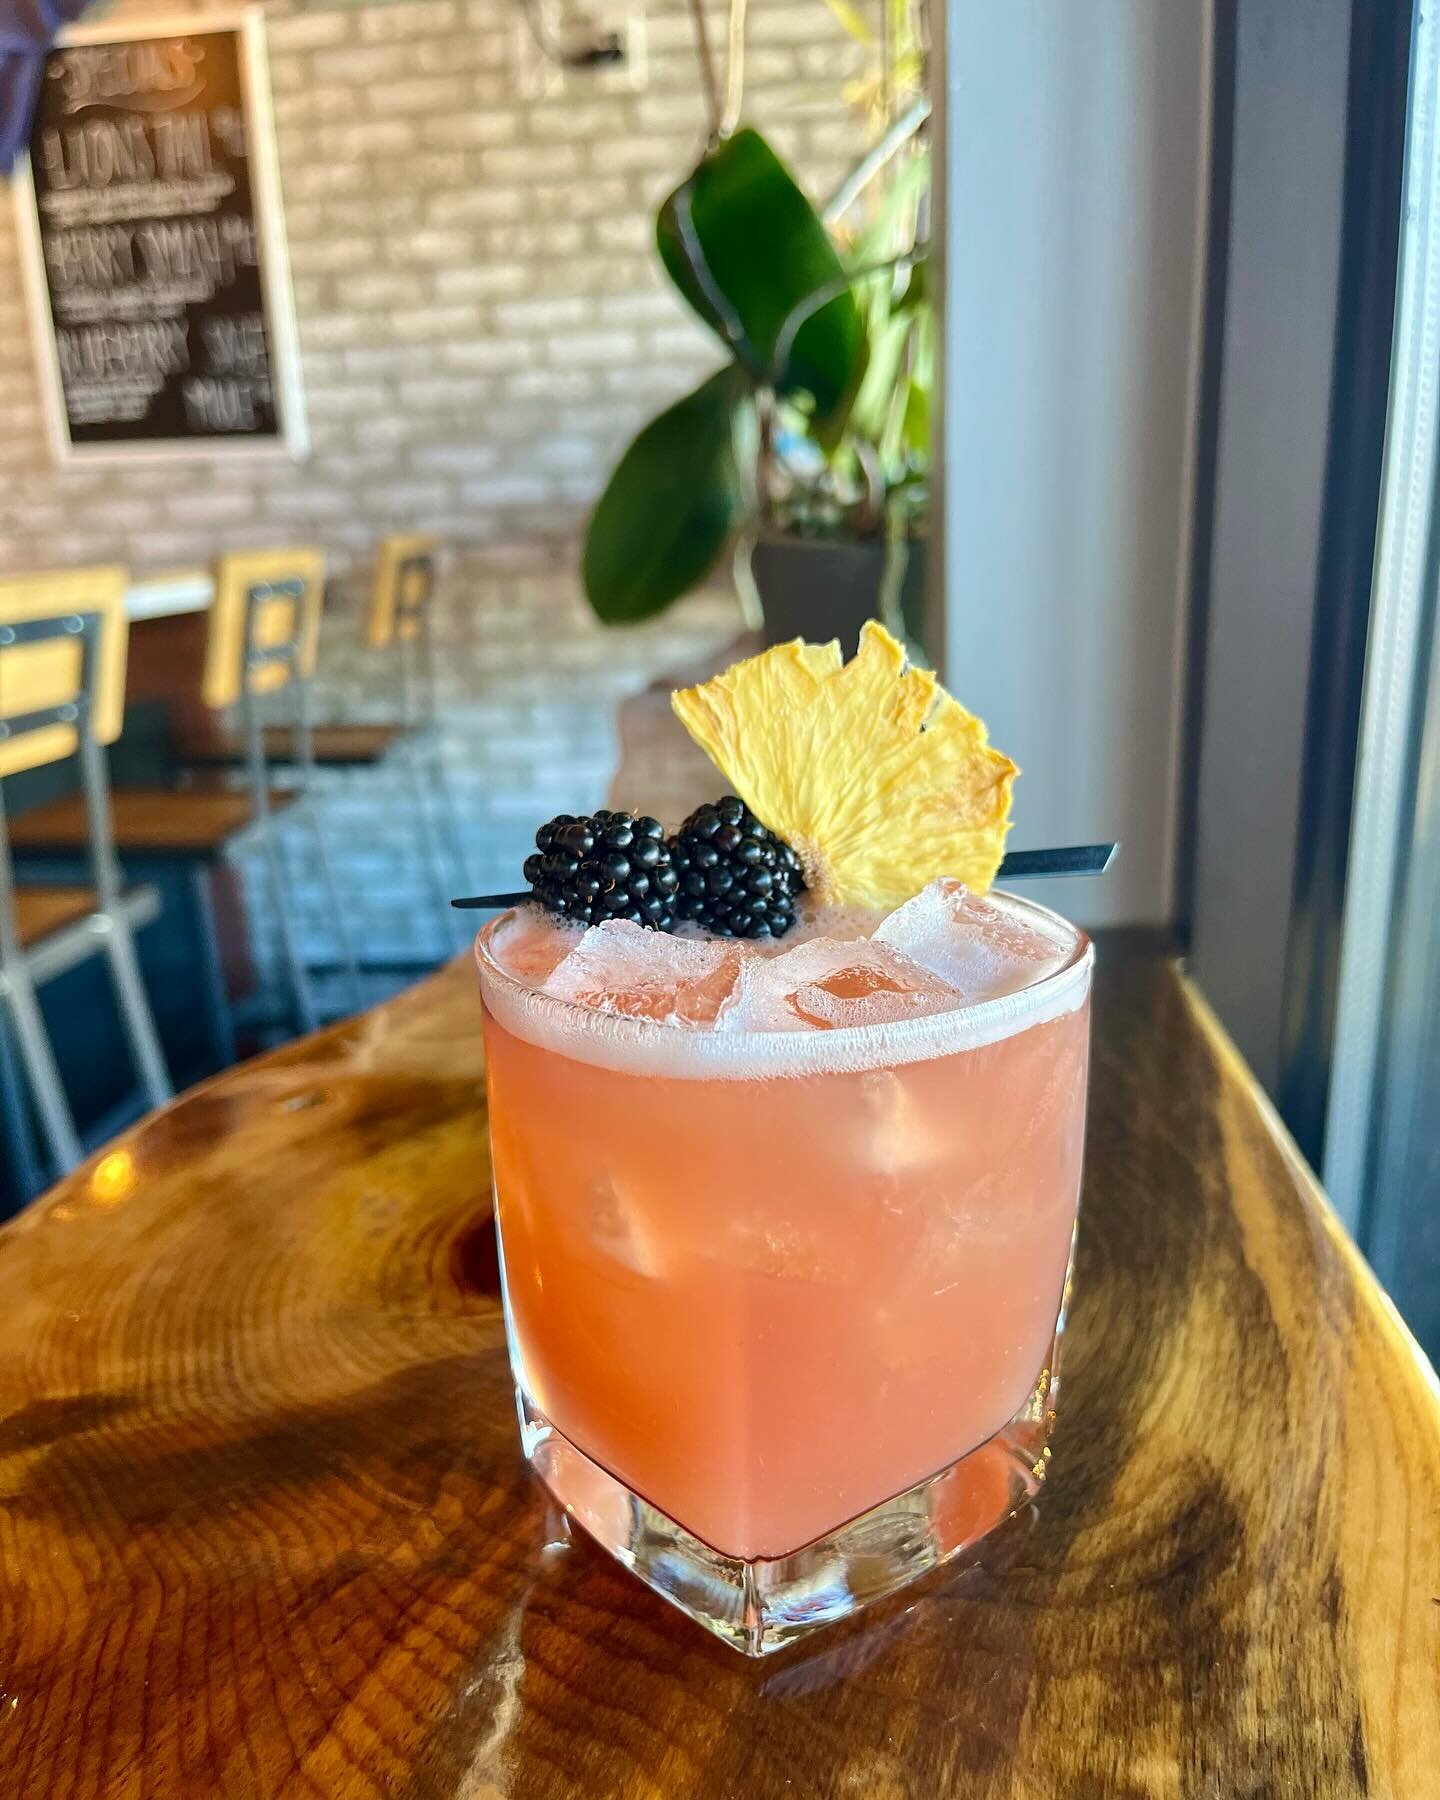 Soaking in every moment of sunshine that this Leap Day has to offer✨ Come in this weekend to taste one of our favorites: Three Little Birds. 

🥃: Rye Whiskey &bull; Sweet Vermouth &bull; blackberry &bull; pineapple &bull; lemon

#elevatingspiritsloc